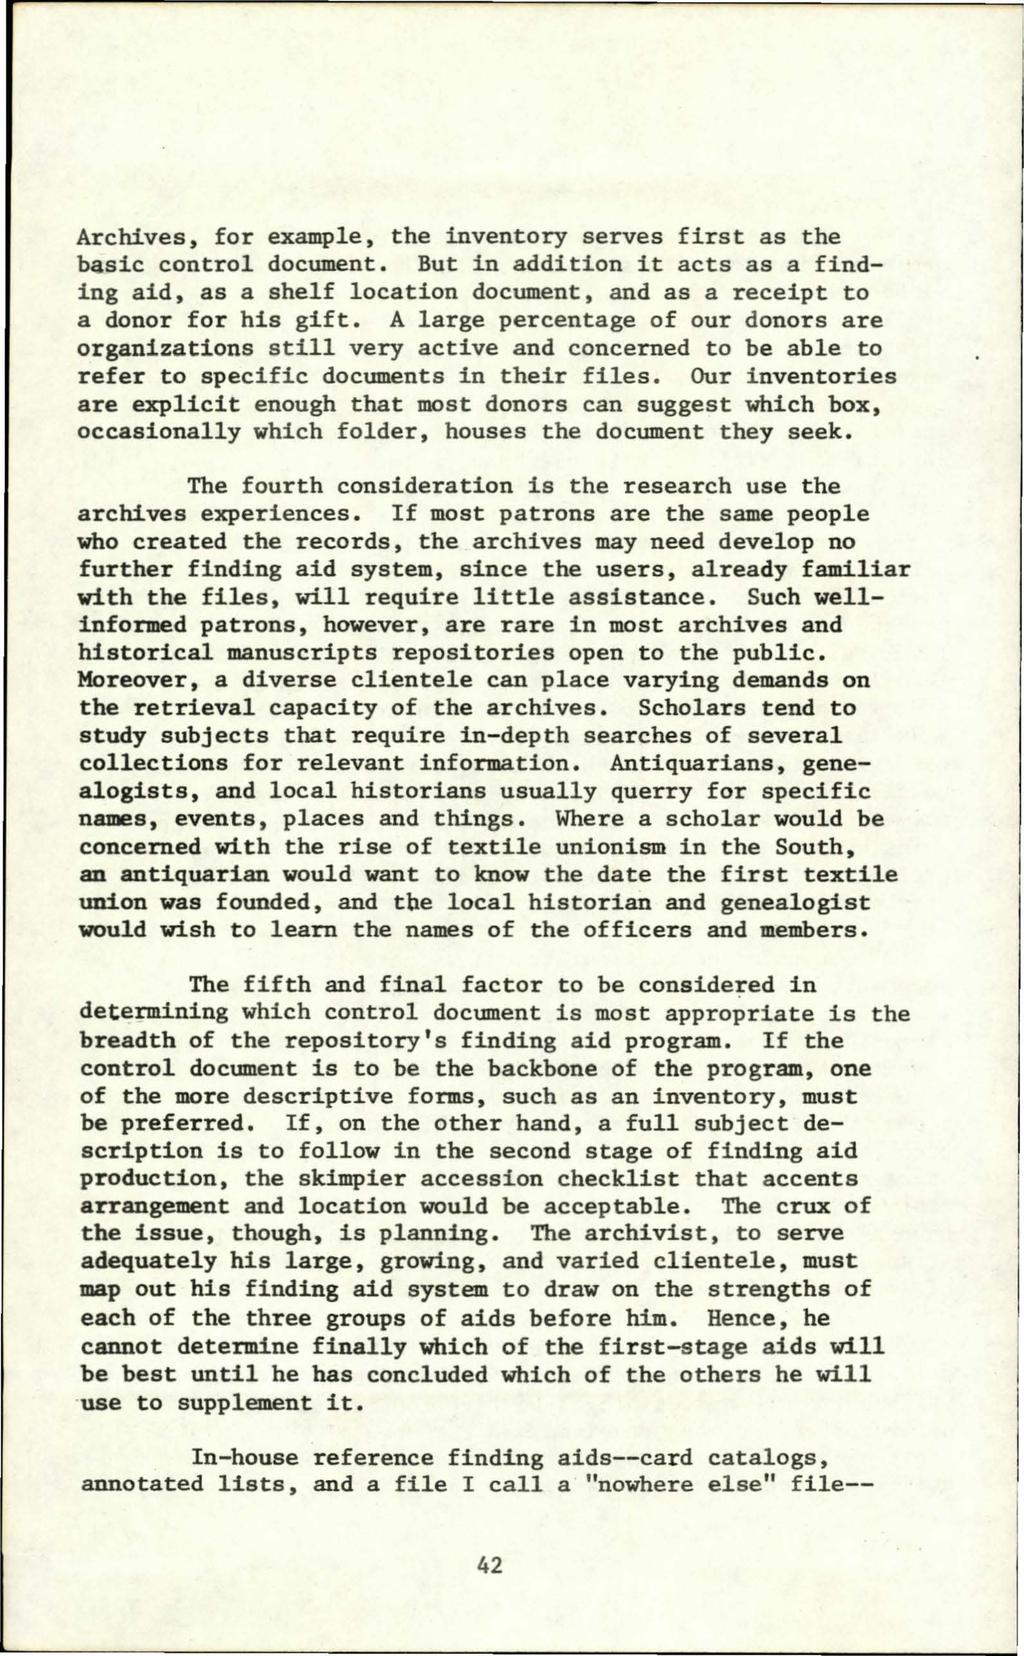 Georgia Archive, Vol. 4 [1976], No. 1, Art. 5 Archives, for example, the inventory serves first as the basic control document.